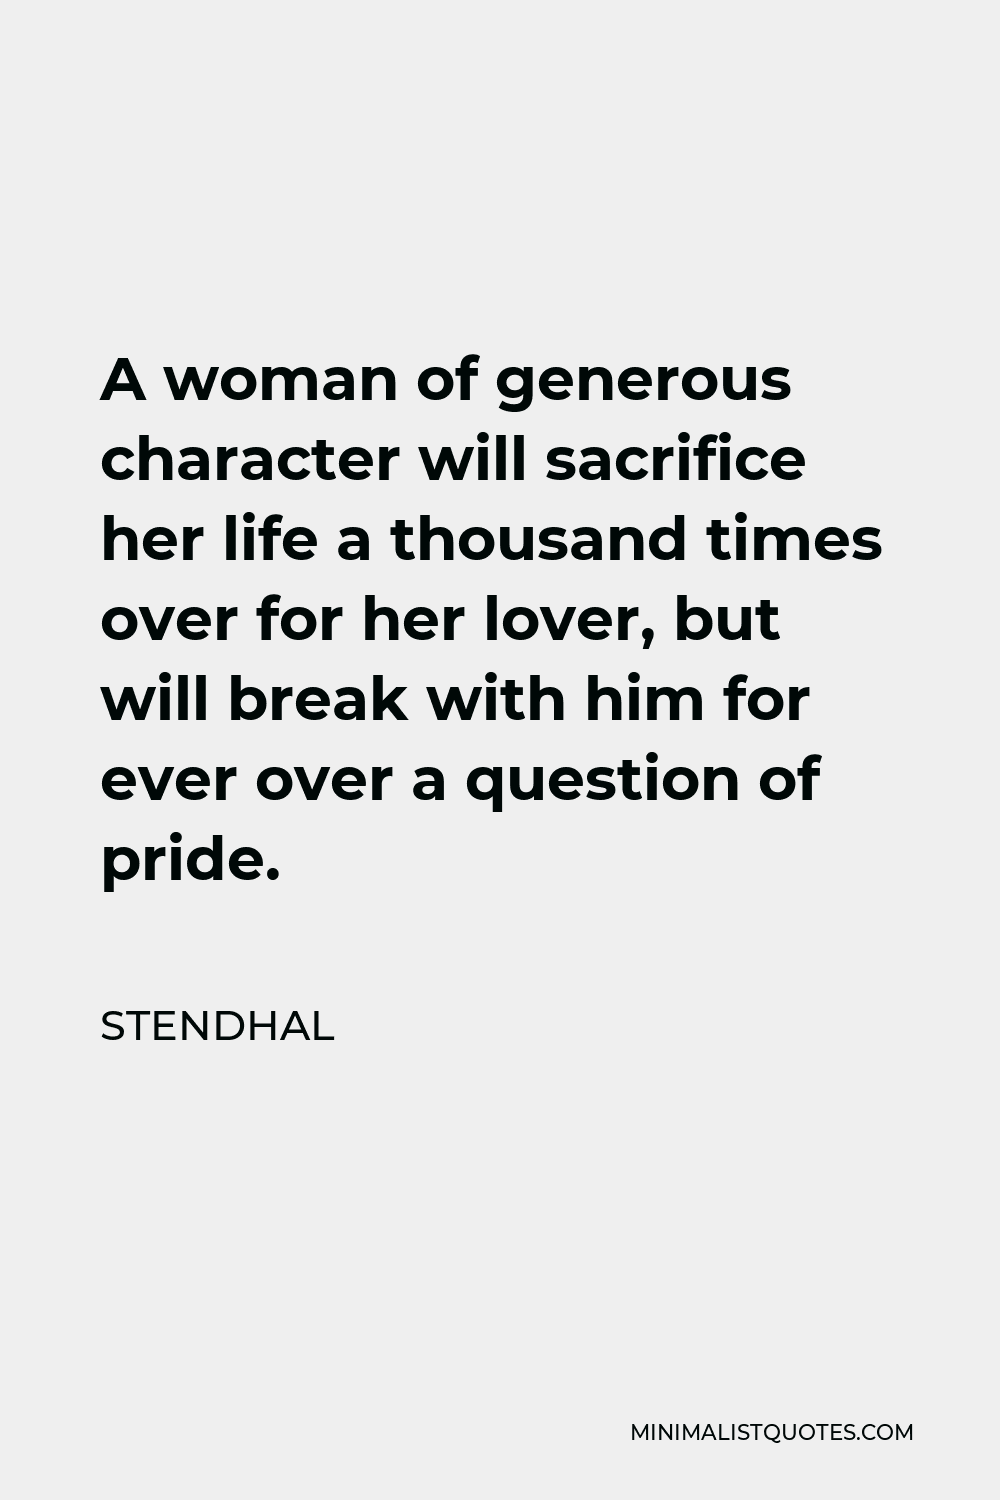 Stendhal Quote - A woman of generous character will sacrifice her life a thousand times over for her lover, but will break with him for ever over a question of pride.